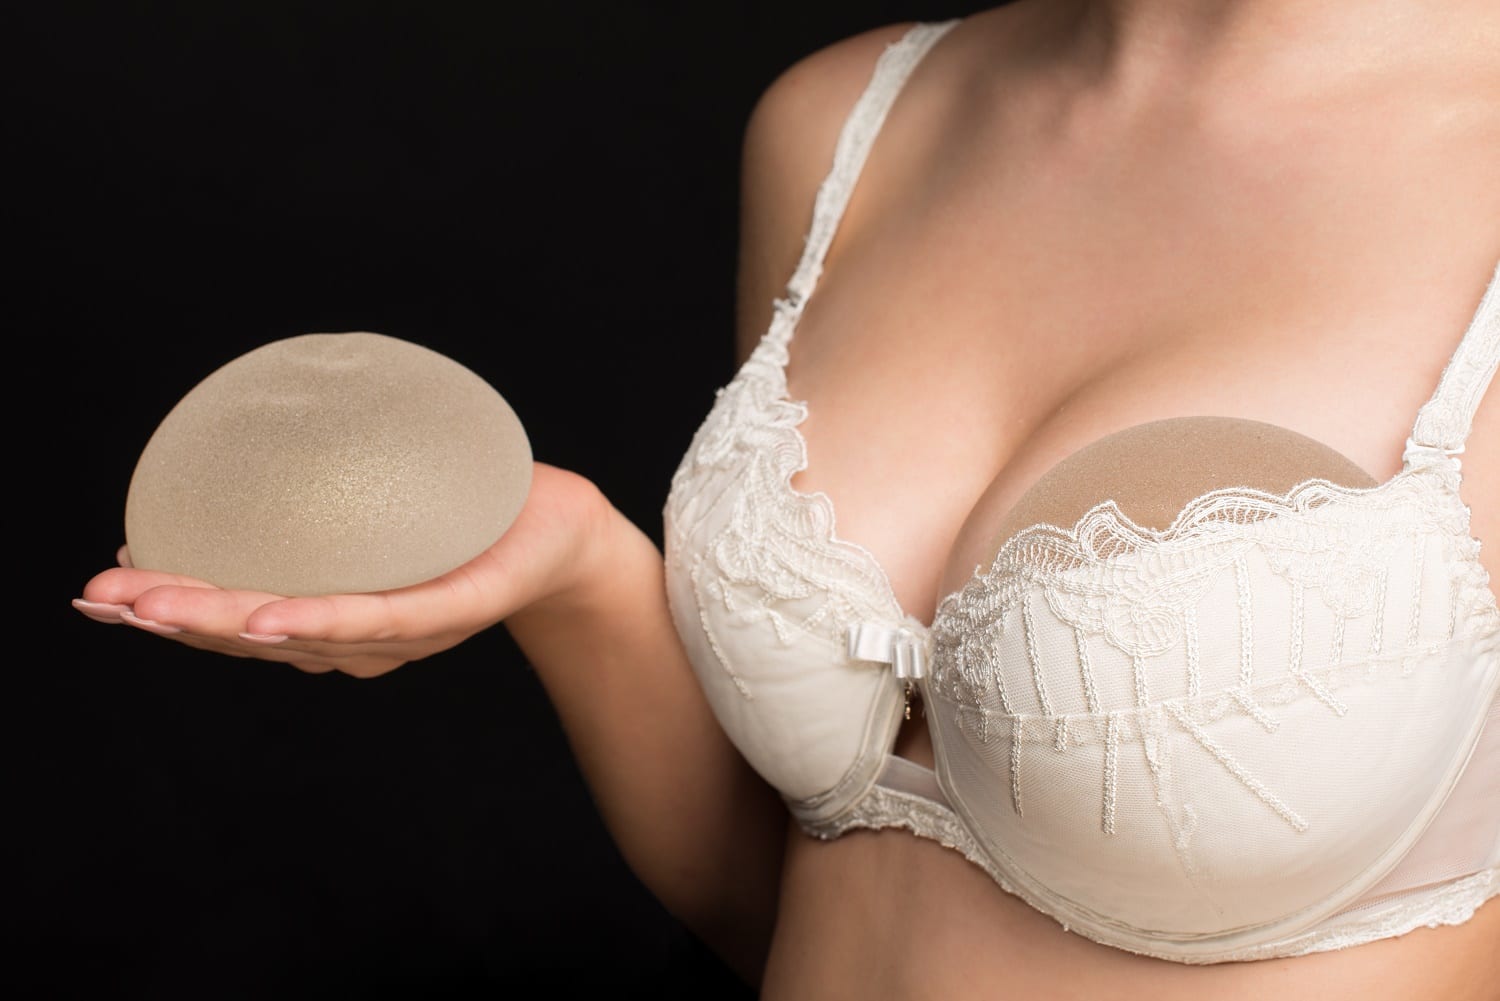 Breast Implants – Over or Under the Muscle? 